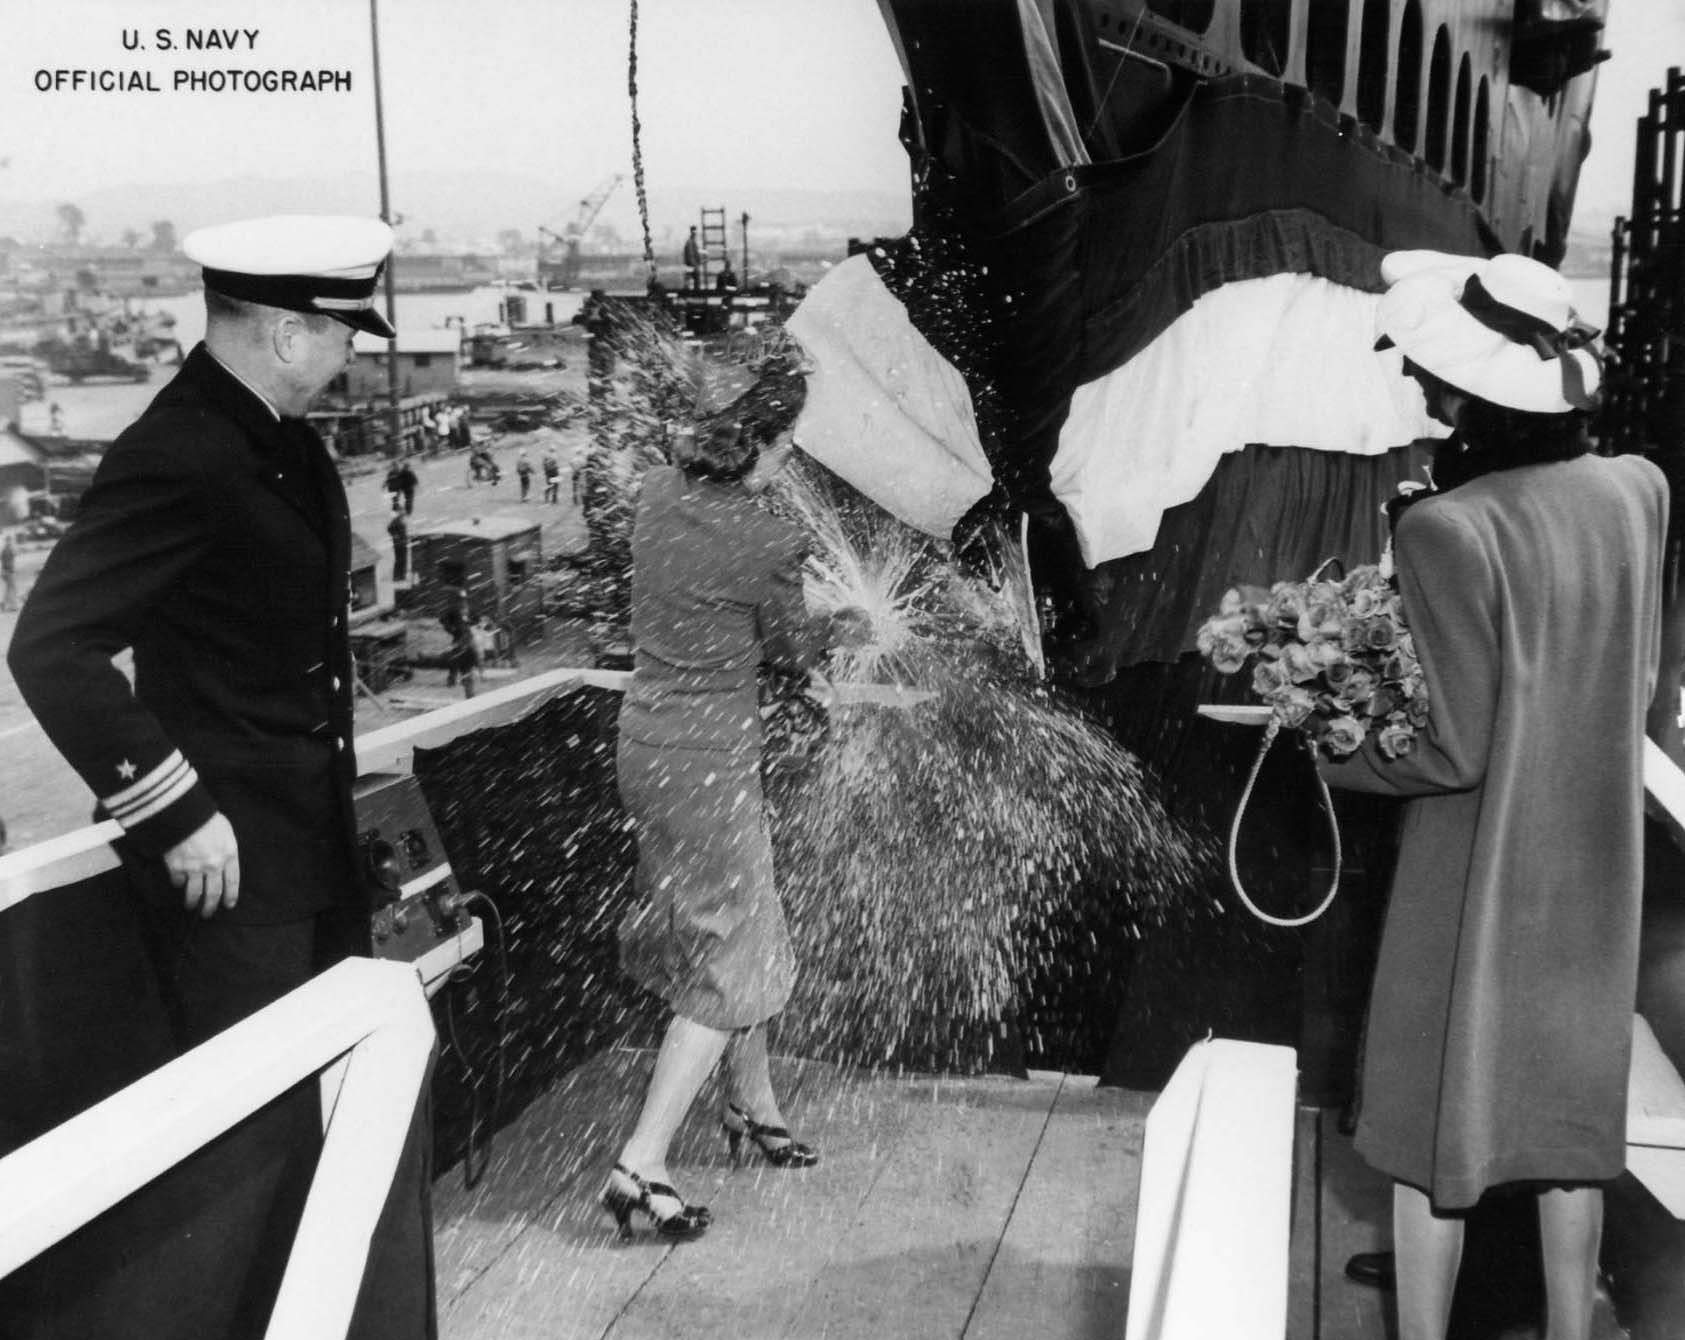 Mrs. Davenport breaking bottle on bow of submarine Trepang while his husband Commander Roy Davenport and Mrs. Garvey looked on, Mare Island Naval Shipyard, California, United States, 23 Mar 1944